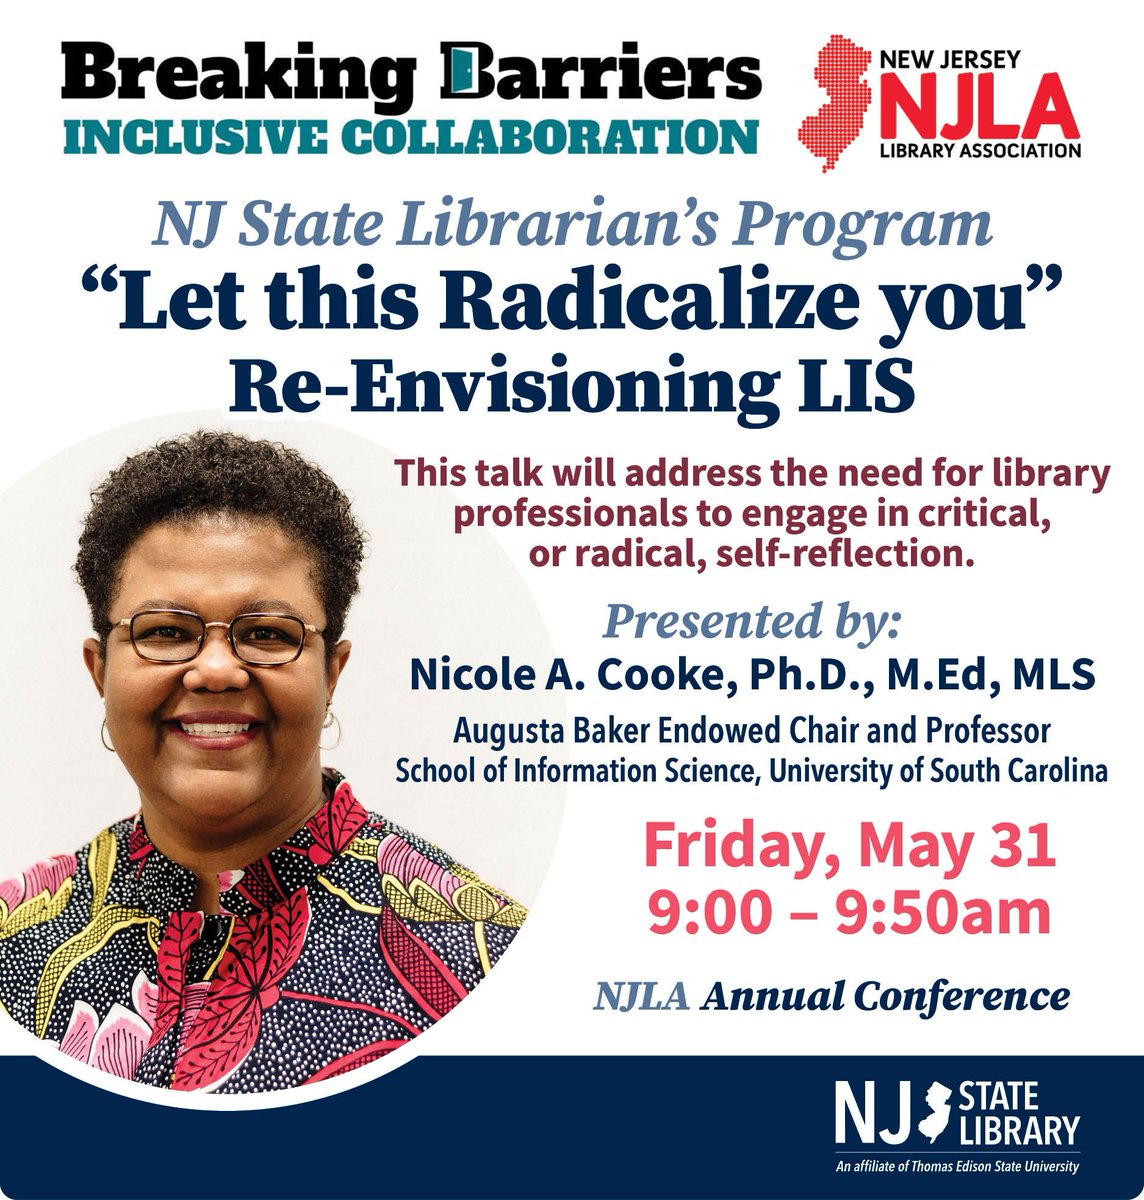 The annual NJLA conference in Atlantic City is May 29th-31st and we hope to see you all there! We hope to see attendees at our State Librarian's breakfast and program on Friday. Click to learn about all NJSL sessions at #NJLA2024 - buff.ly/3xWmb3G